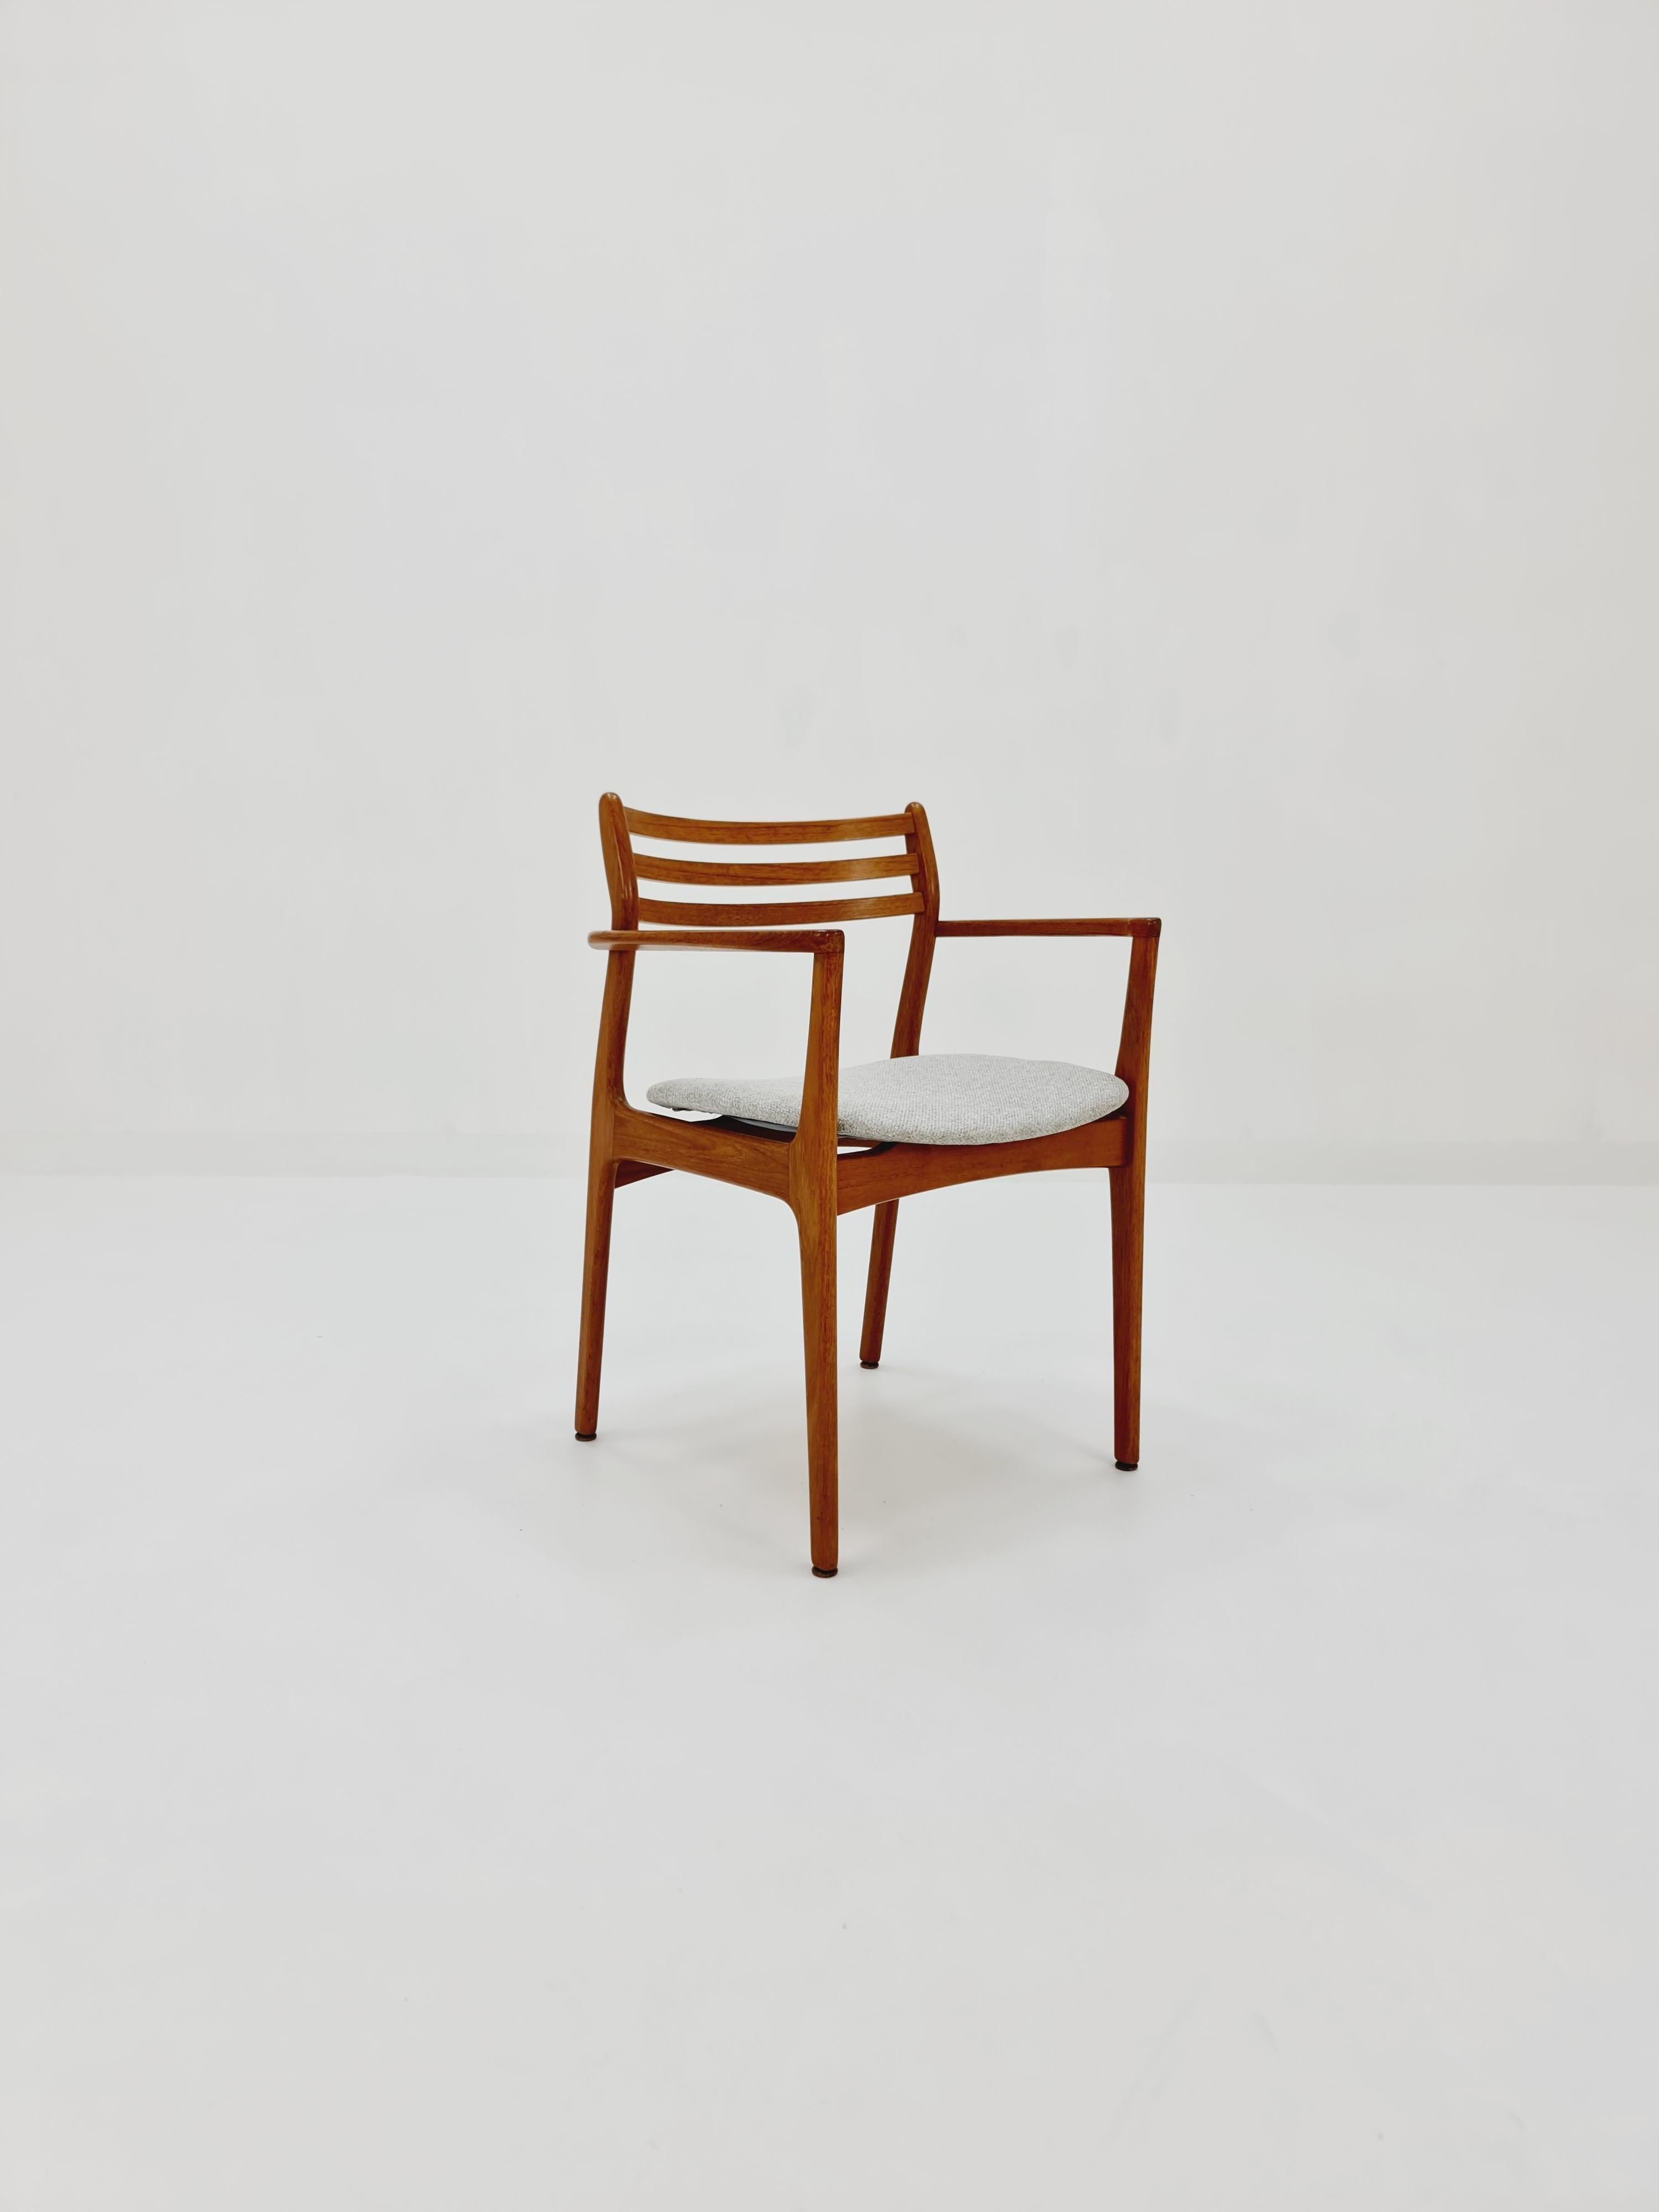 Danish Rare Teak Armchair By P.E. Jorgensen for Farsø Møbelfabrik,  1960s

The chair is in great condition, however, as with all vintage items some minor wear marks should be expected.

Made in Denmark in the 60s 

Designer: Poul Erik